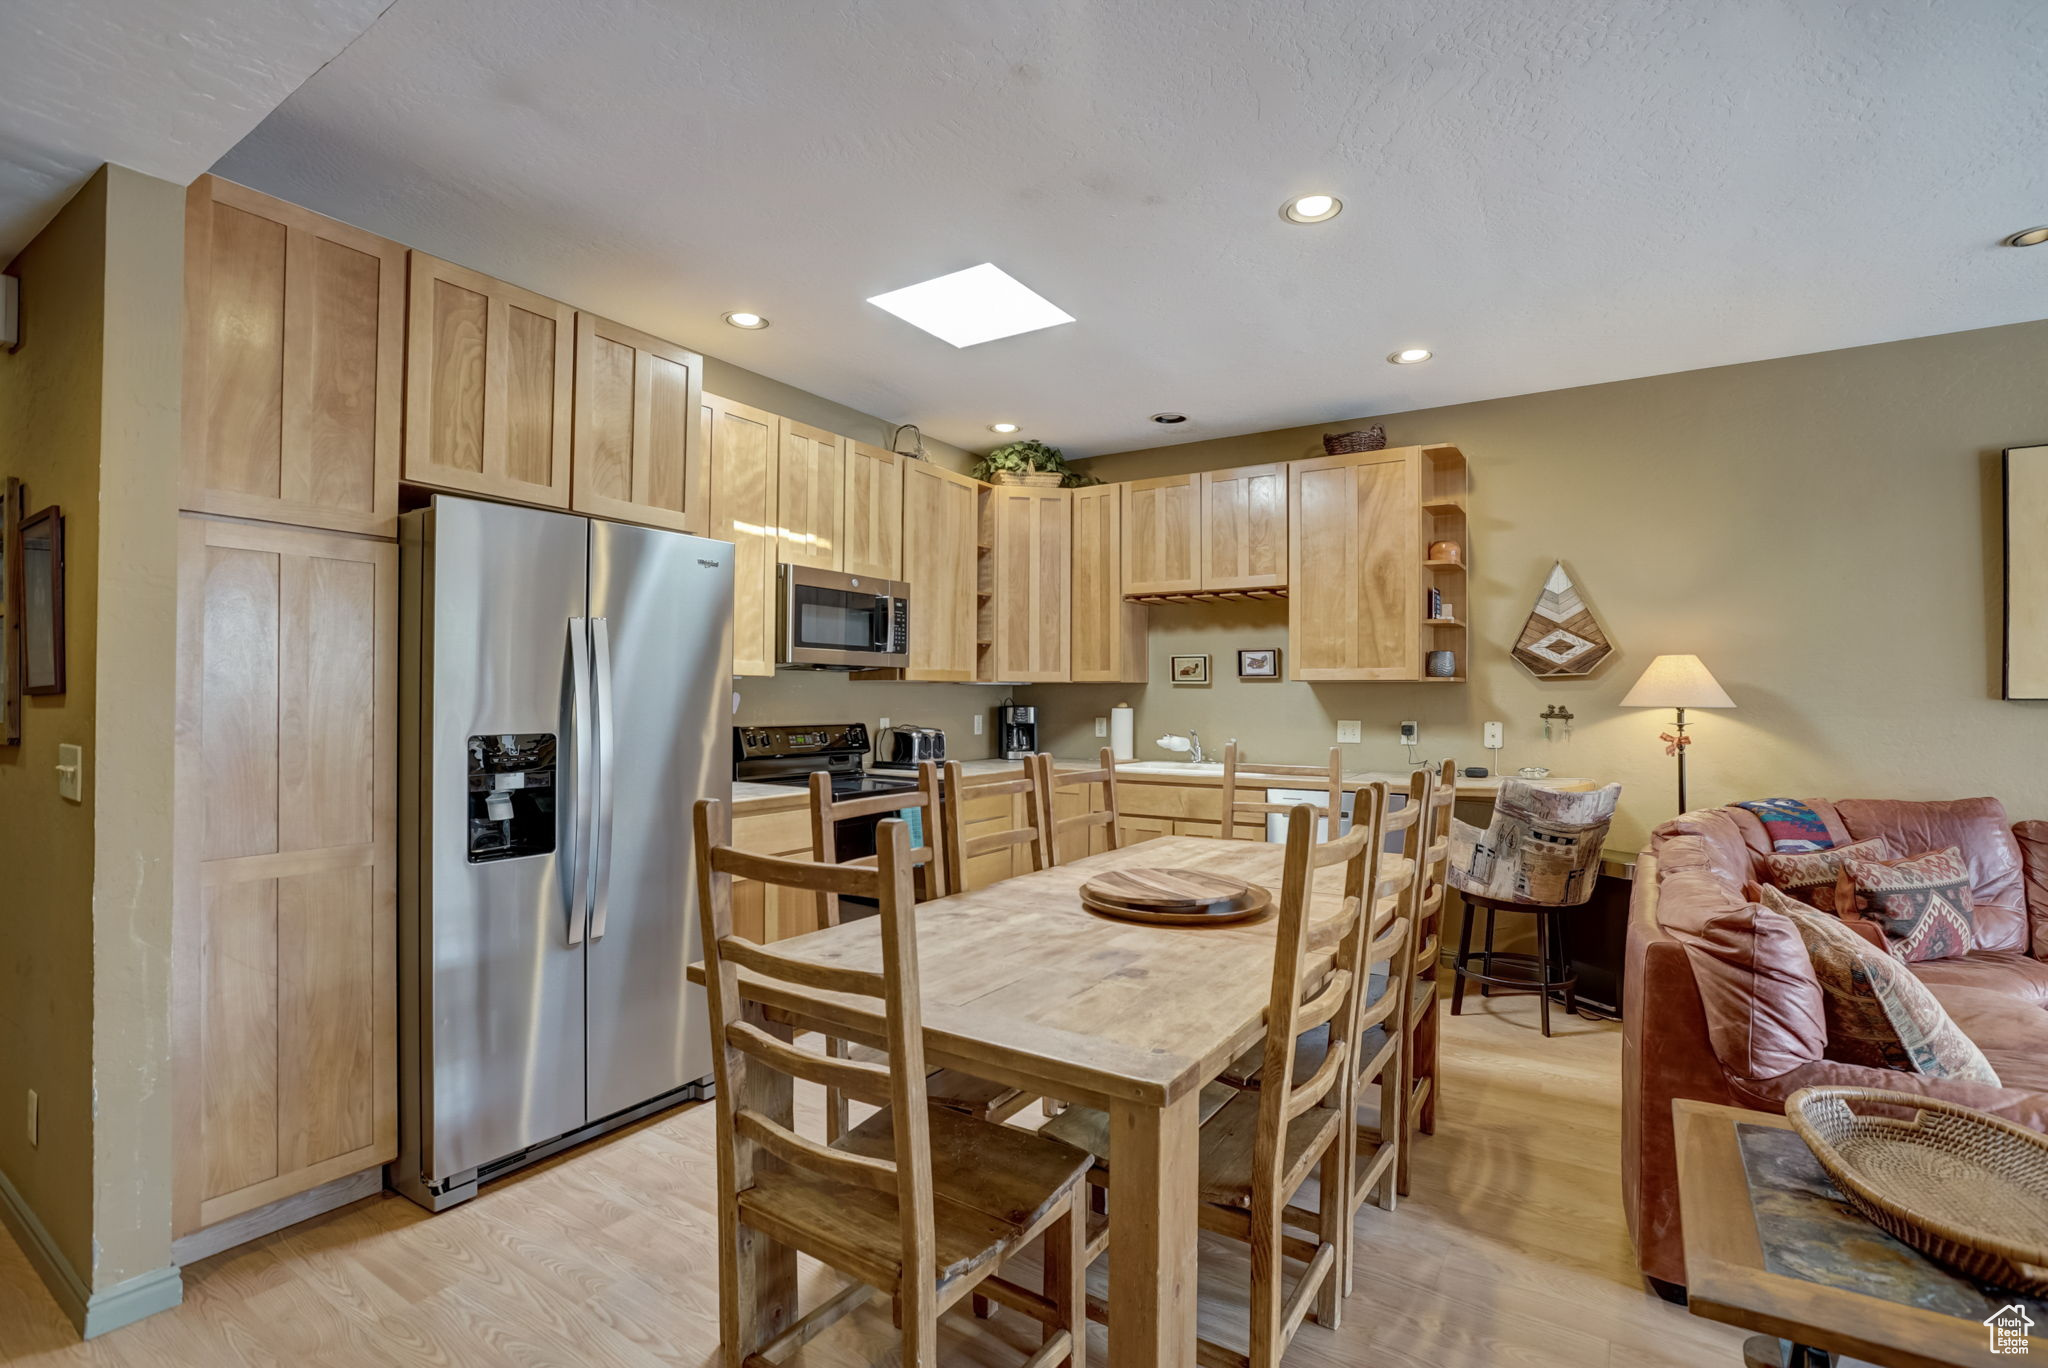 Kitchen featuring light brown cabinetry, light wood-type flooring, and stainless steel appliances